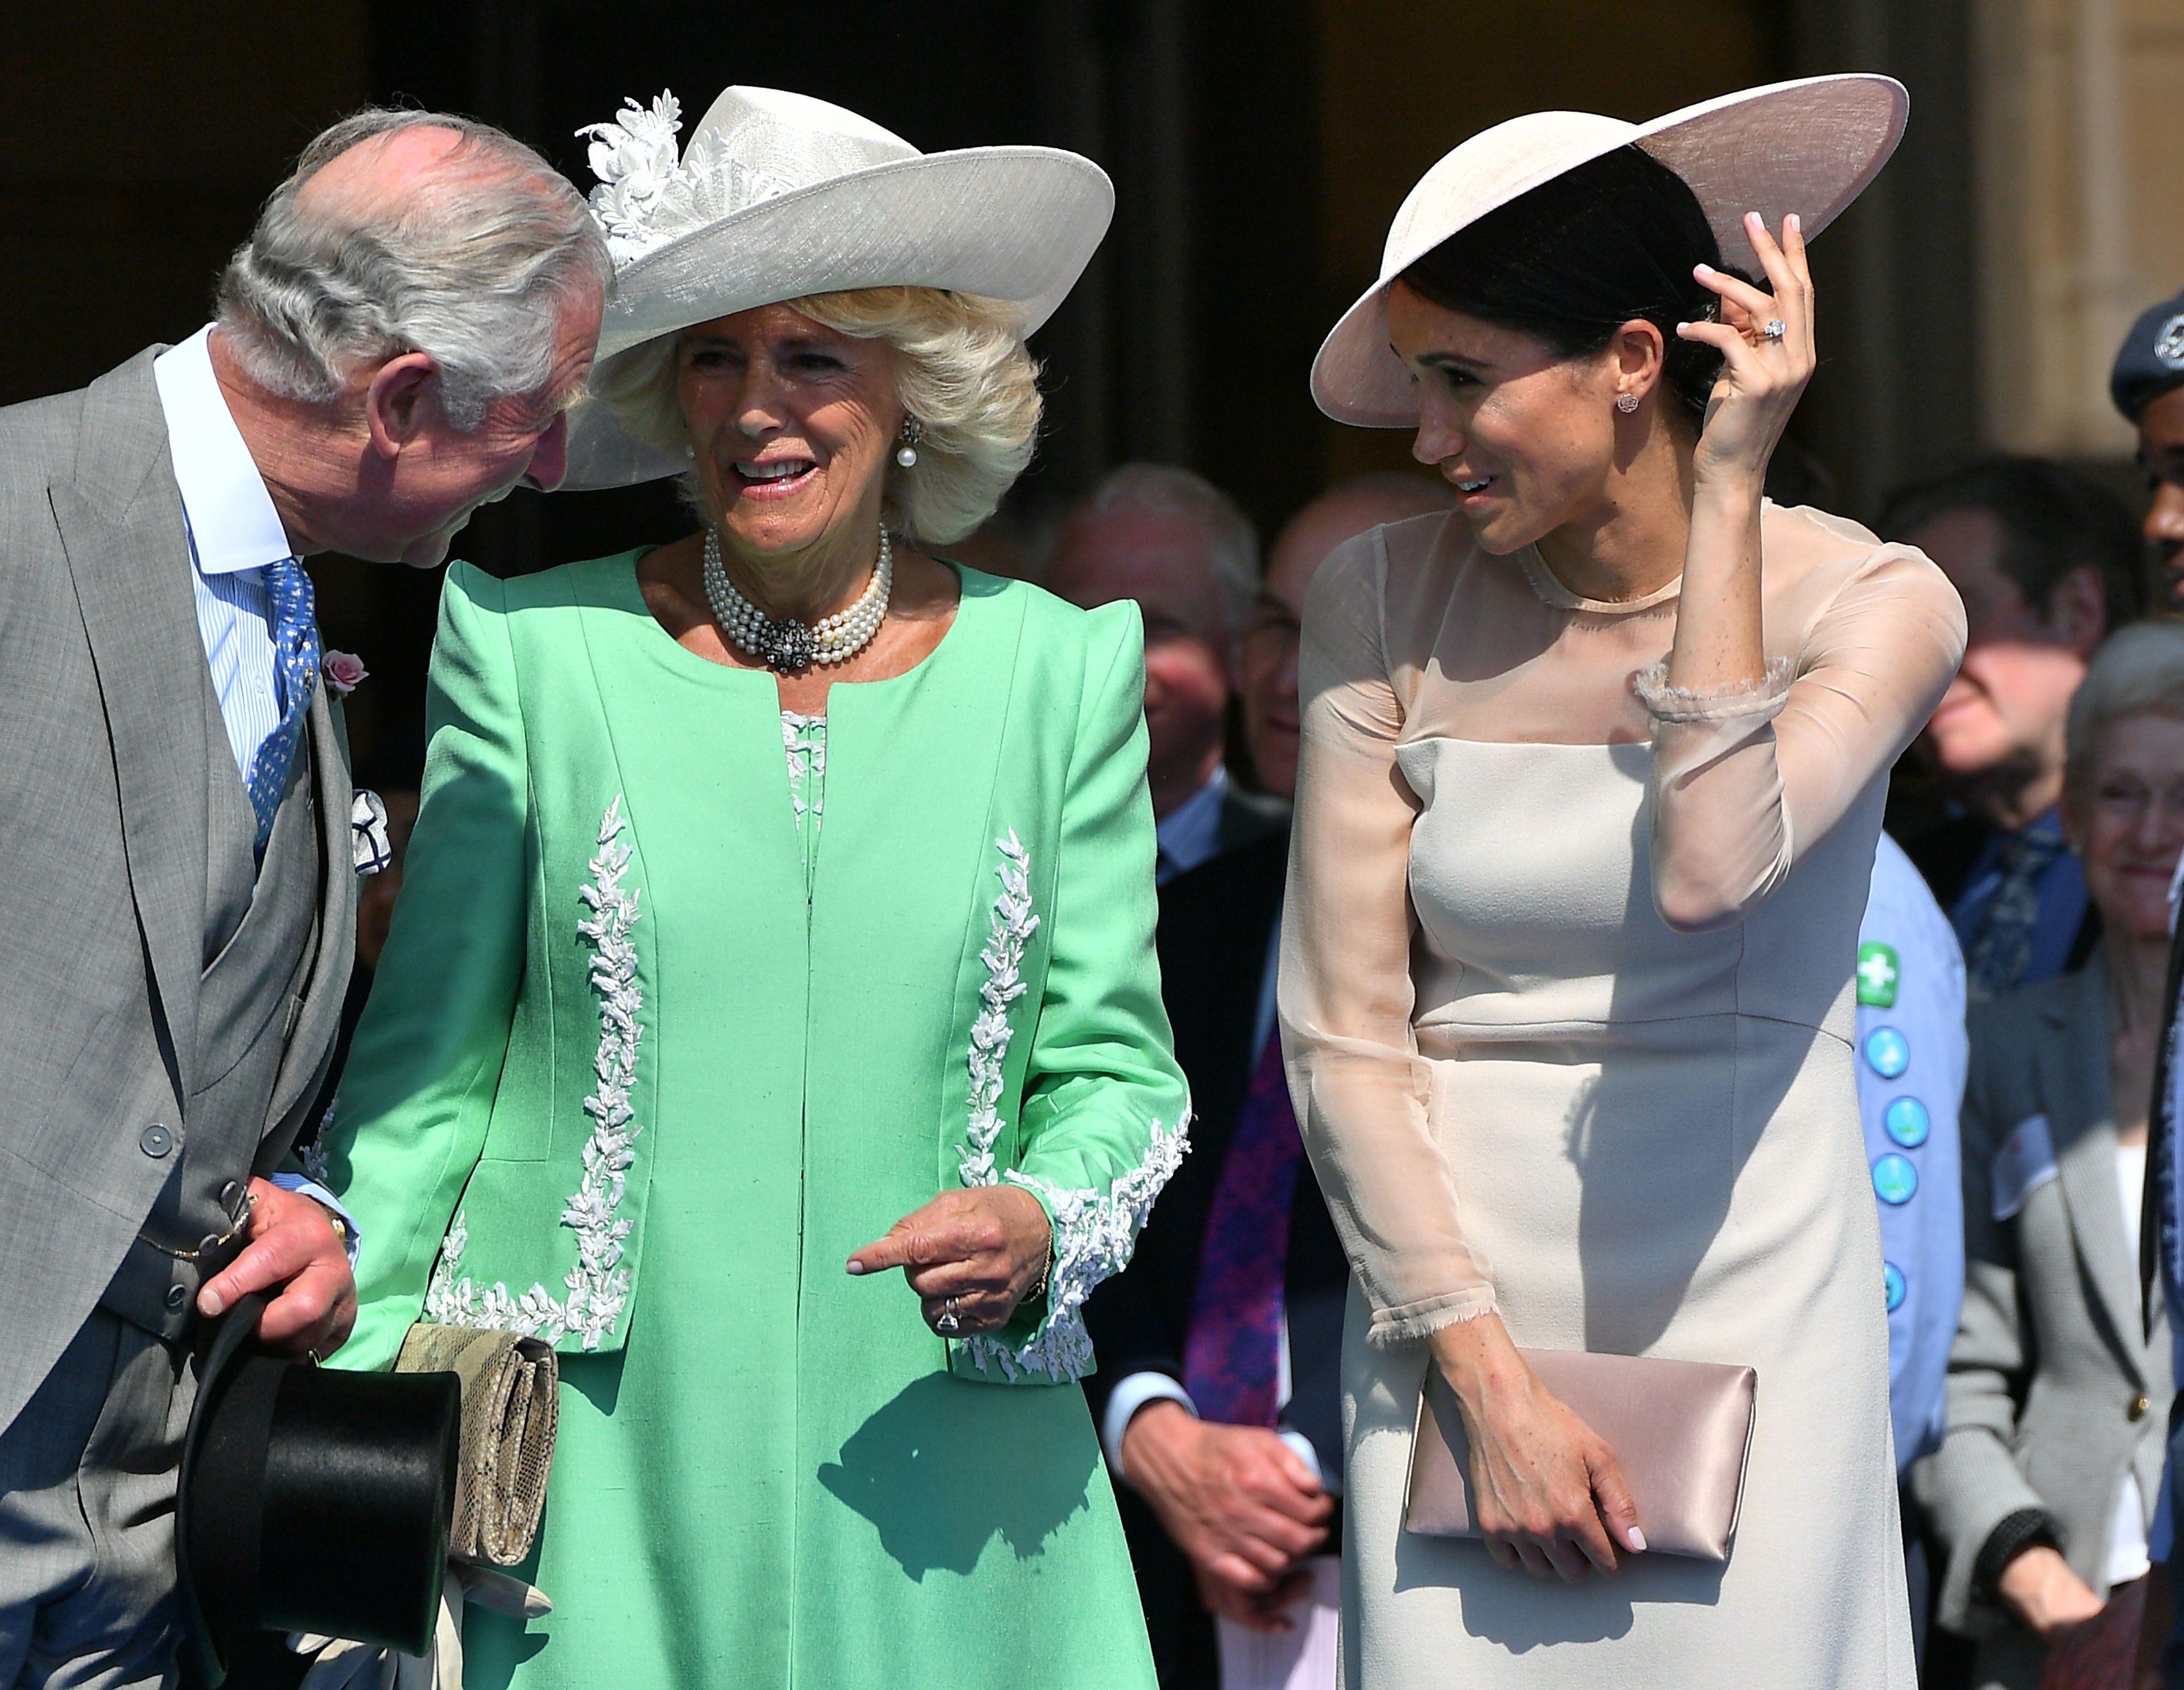 Prince Charles, Duchess Camilla, and Duchess Meghan during Charles's 70th Birthday Garden Party at Buckingham Palace in London on May 22, 2018. | Source: Getty Images